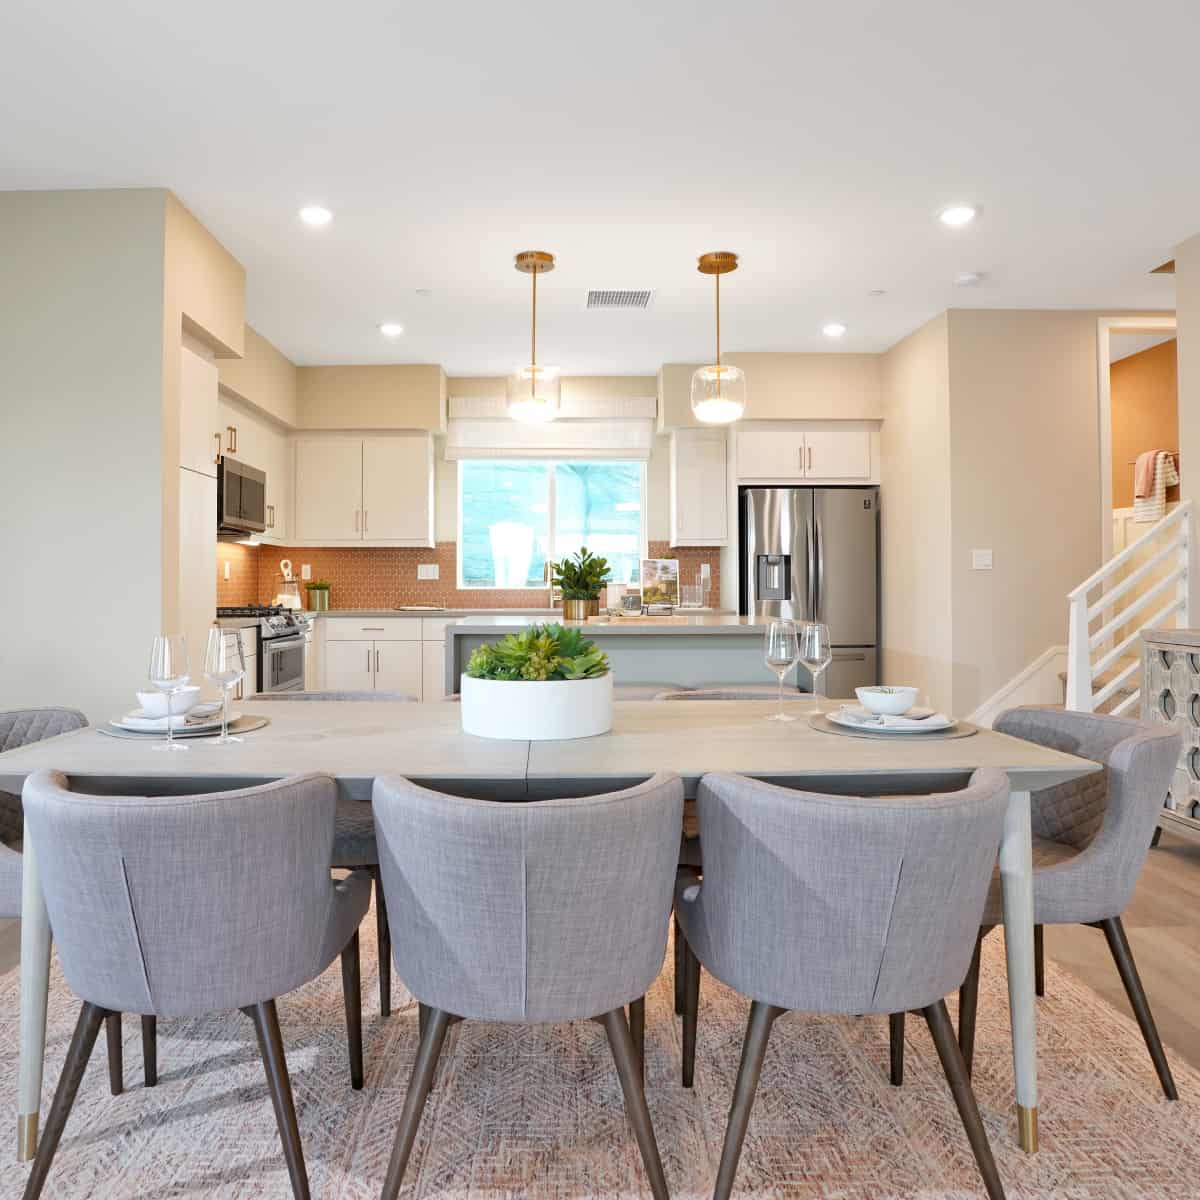 Dining Room in Plan 4 at Townes at Broadway by Melia Homes in Anaheim, CA